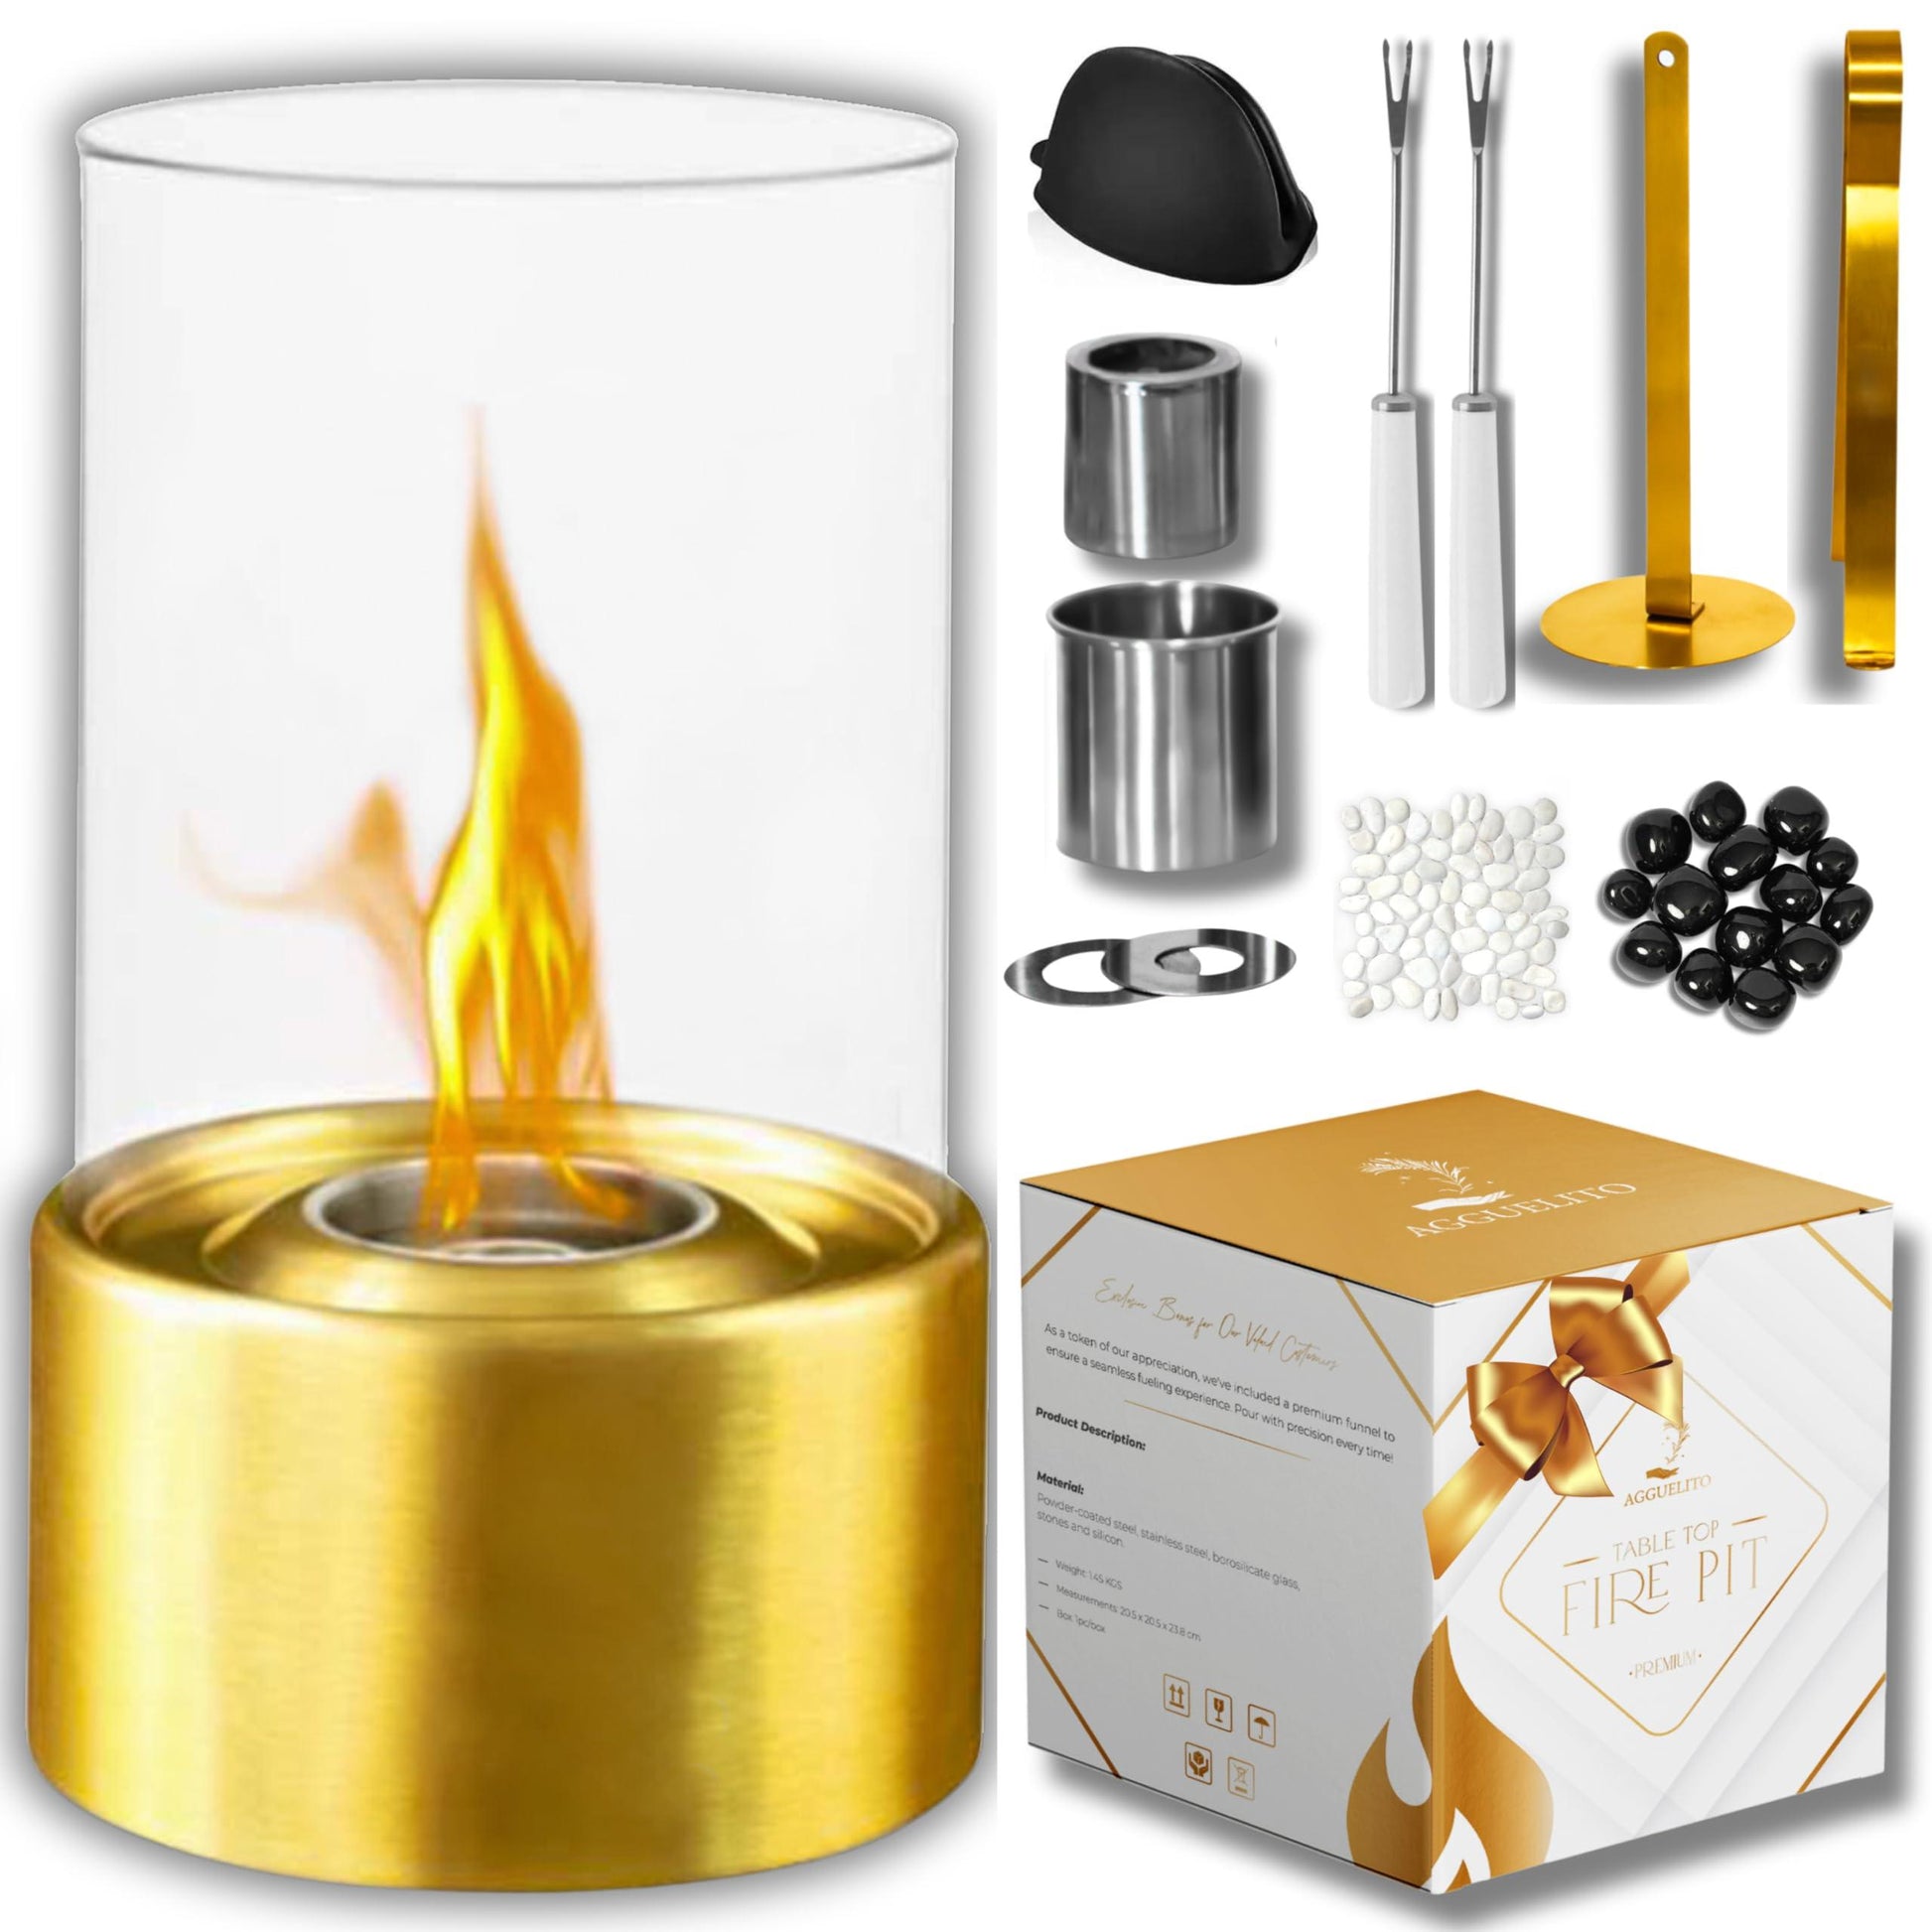 Gold Table top FirePit - Elegant Portable Tabletop Fireplace with Protective Glass & Bioethanol or Alcohol Burner - Perfect for Patio Decor & Housewarming Gifts - Tabletop firepit Indoor & Outdoor. - CookCave